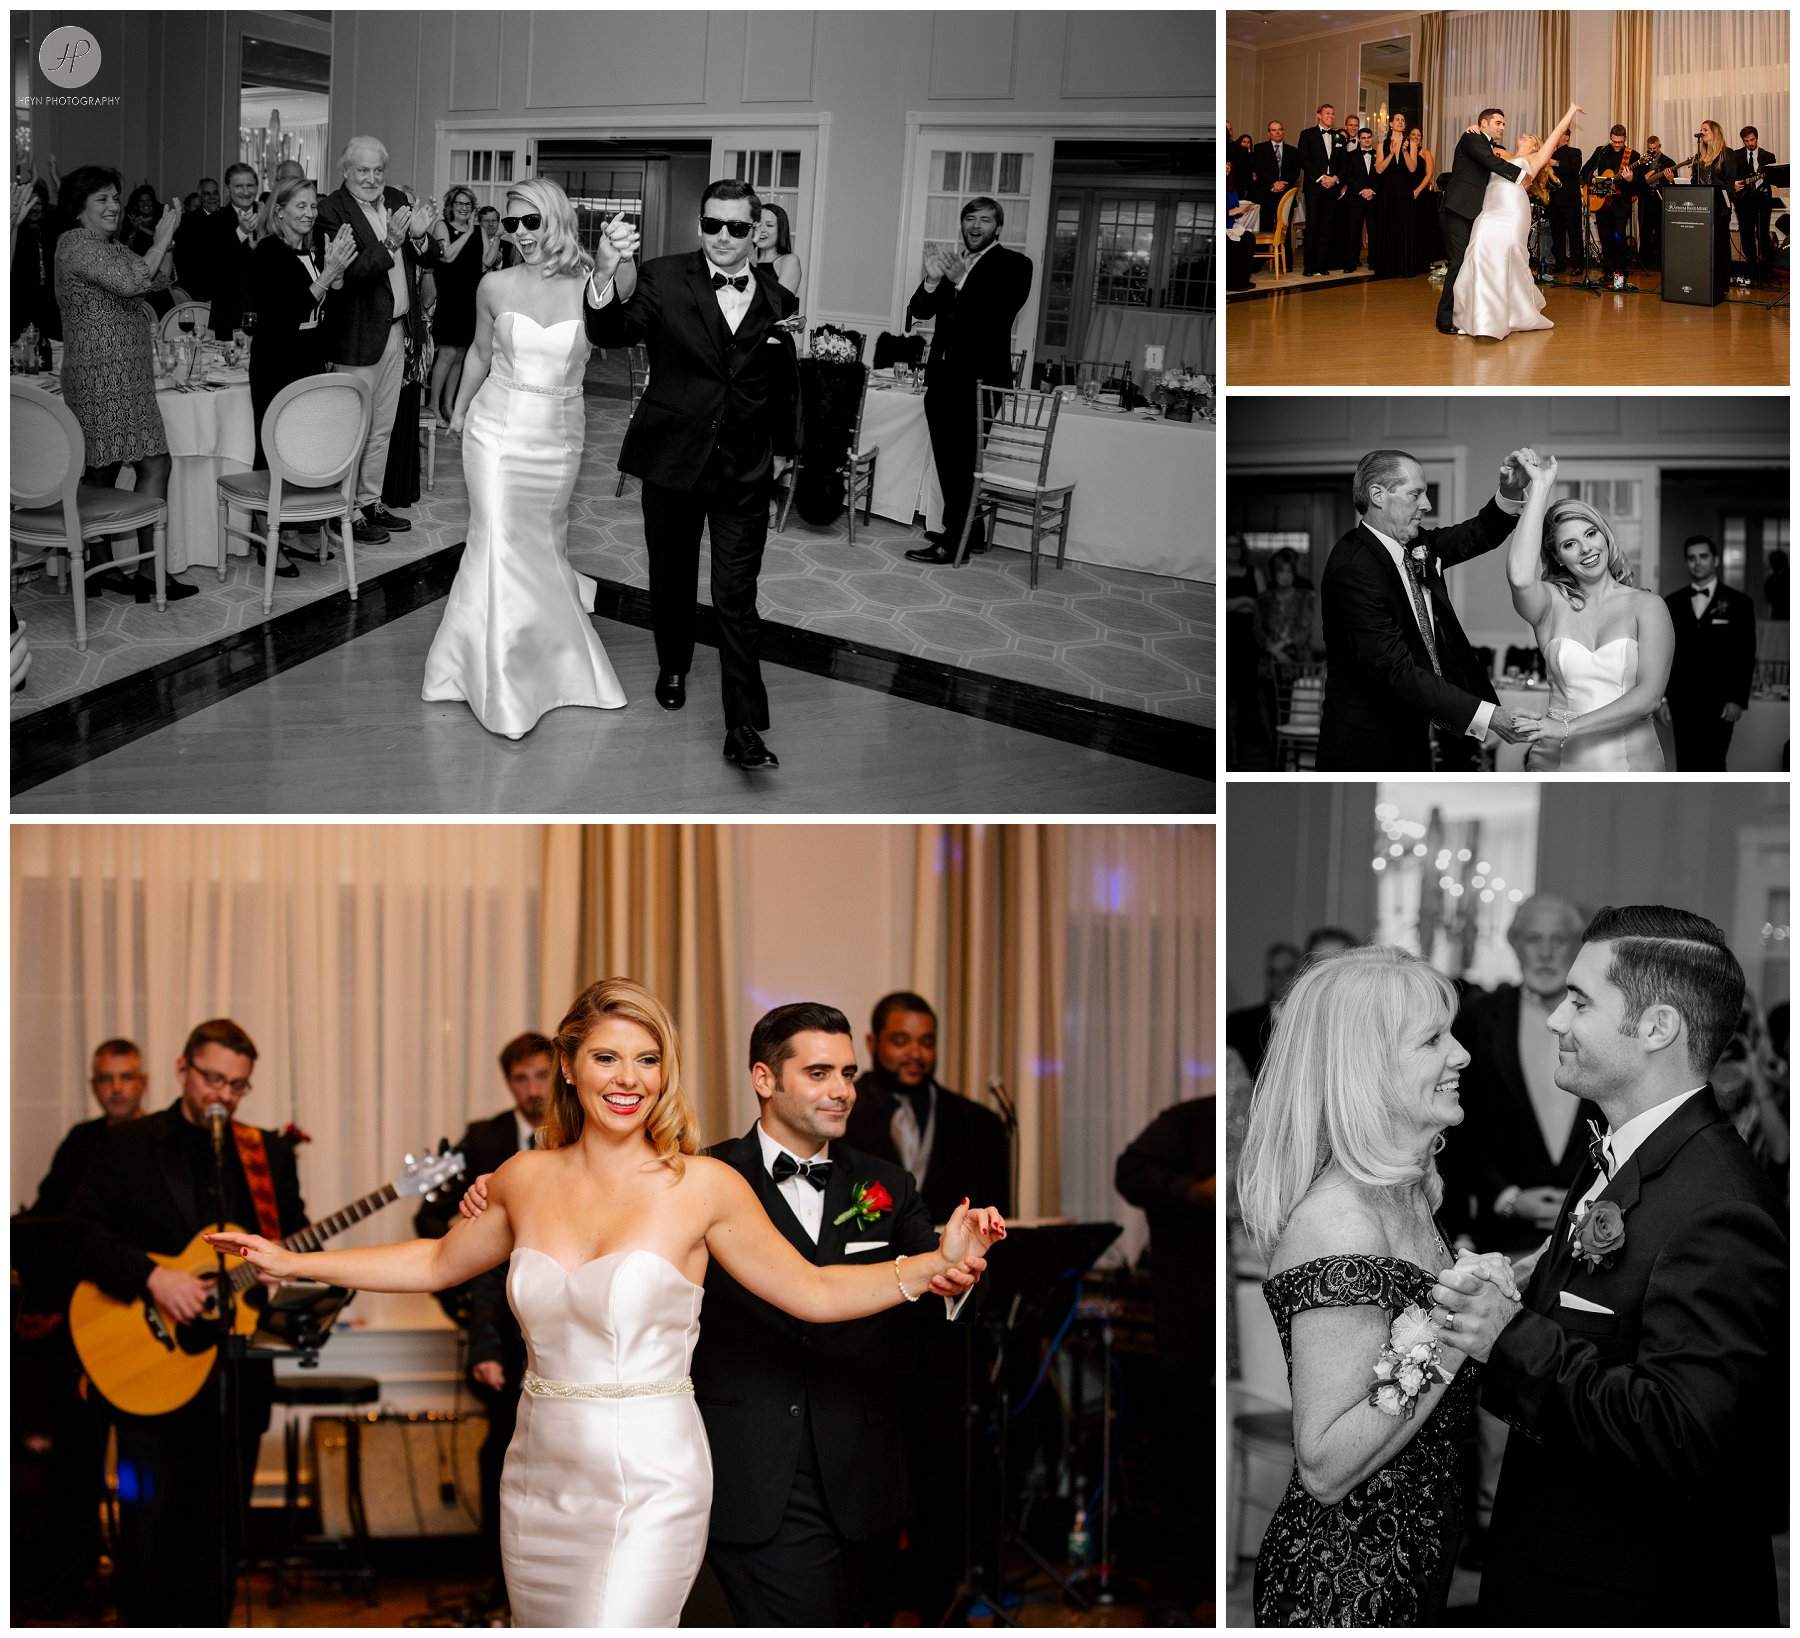 bride and groom first dance at spring lake bath and tennis club wedding in new jersey